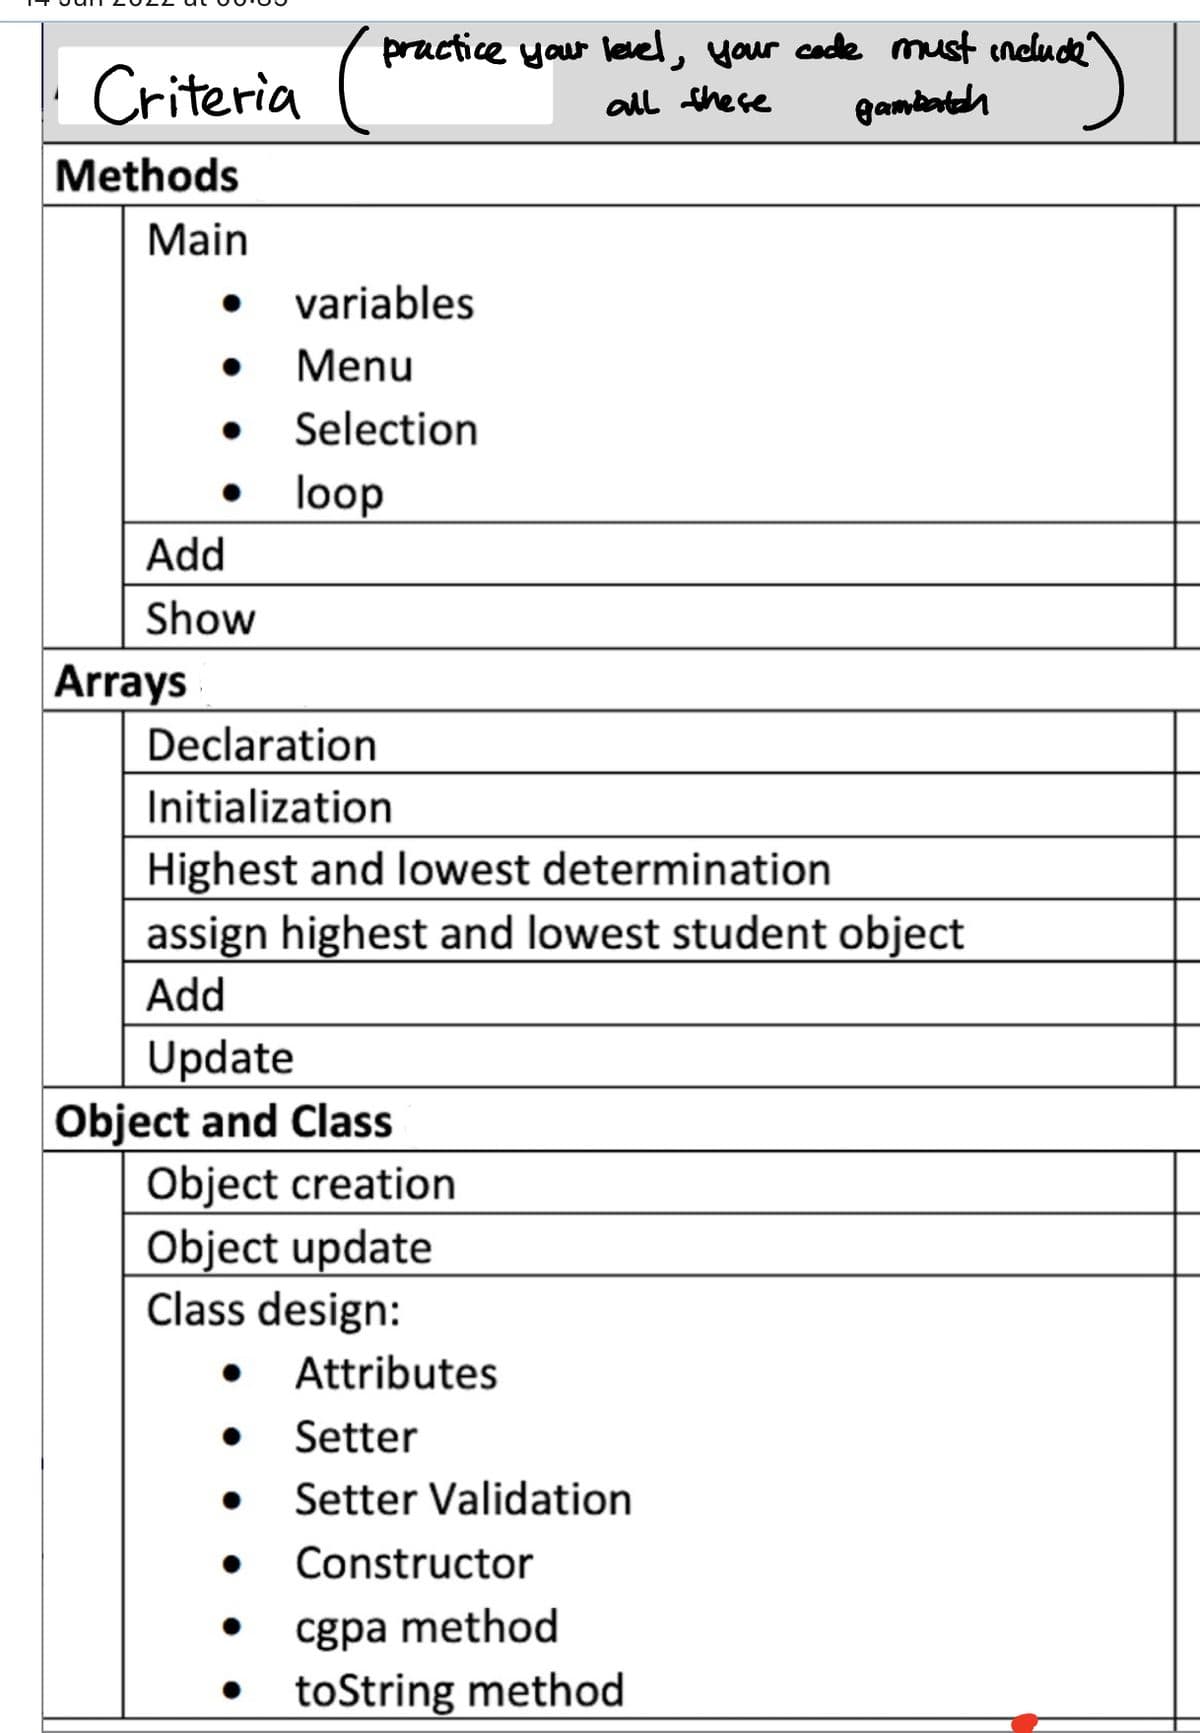 Criteria
Methods
Main
practice your level, your code must include
luck)
all these
gambatah
Arrays
variables
Menu
Selection
• loop
Add
Show
Declaration
Initialization
Highest and lowest determination
assign highest and lowest student object
Add
Update
Object and Class
Object creation
Object update
Class design:
Attributes
Setter
Setter Validation
● Constructor
cgpa method
toString method